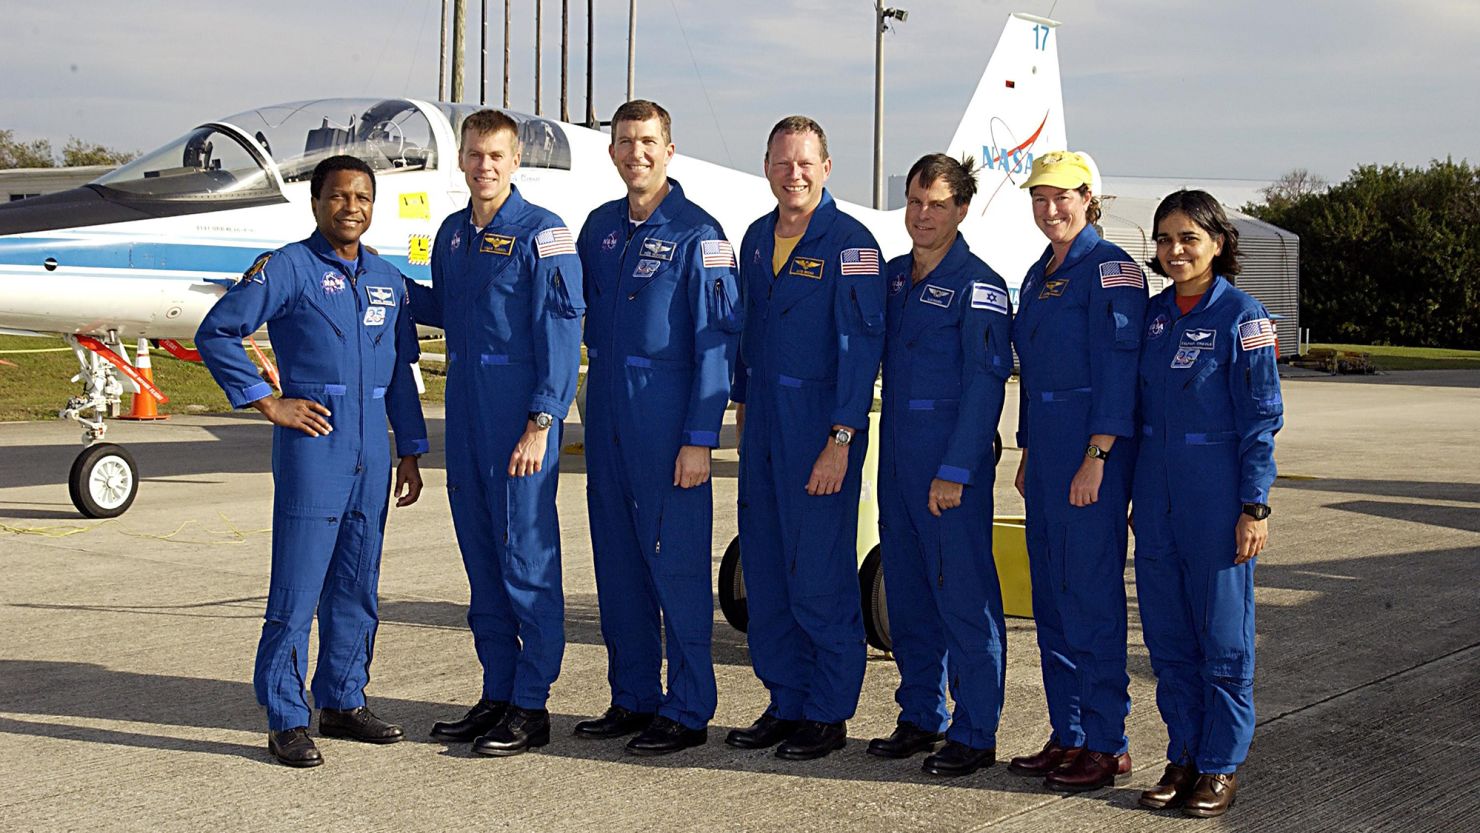 The STS-107 crew gathered at NASA's Kennedy Space Center in Florida prior to the January 2003 launch: (from left) Michael P. Anderson, William C. "Willie" McCool, Rick D. Husband, David M. Brown, Ilan Ramon of the Israeli Space Agency, Laurel B. Clark and Kalpana Chawla.